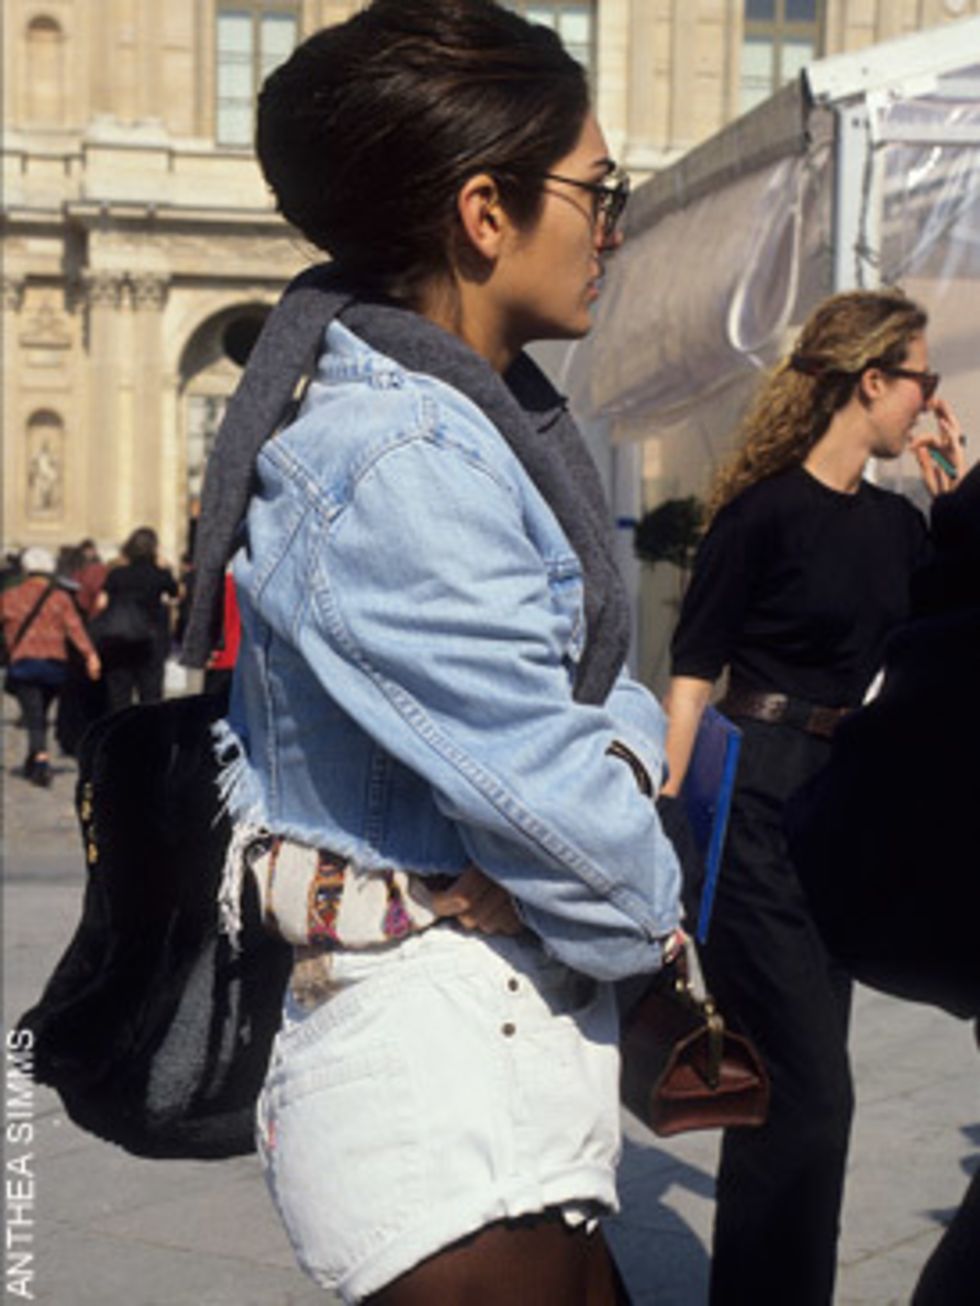 <p> High waisted, faded <a href="http://www.elleuk.com/starstyle/celebrity-trends/%28section%29/everyone-s-wearing-denim-shorts2">denim shorts</a> have been ubiquitous at this summers festivals and in the capital of late. Back then, they were worn with c